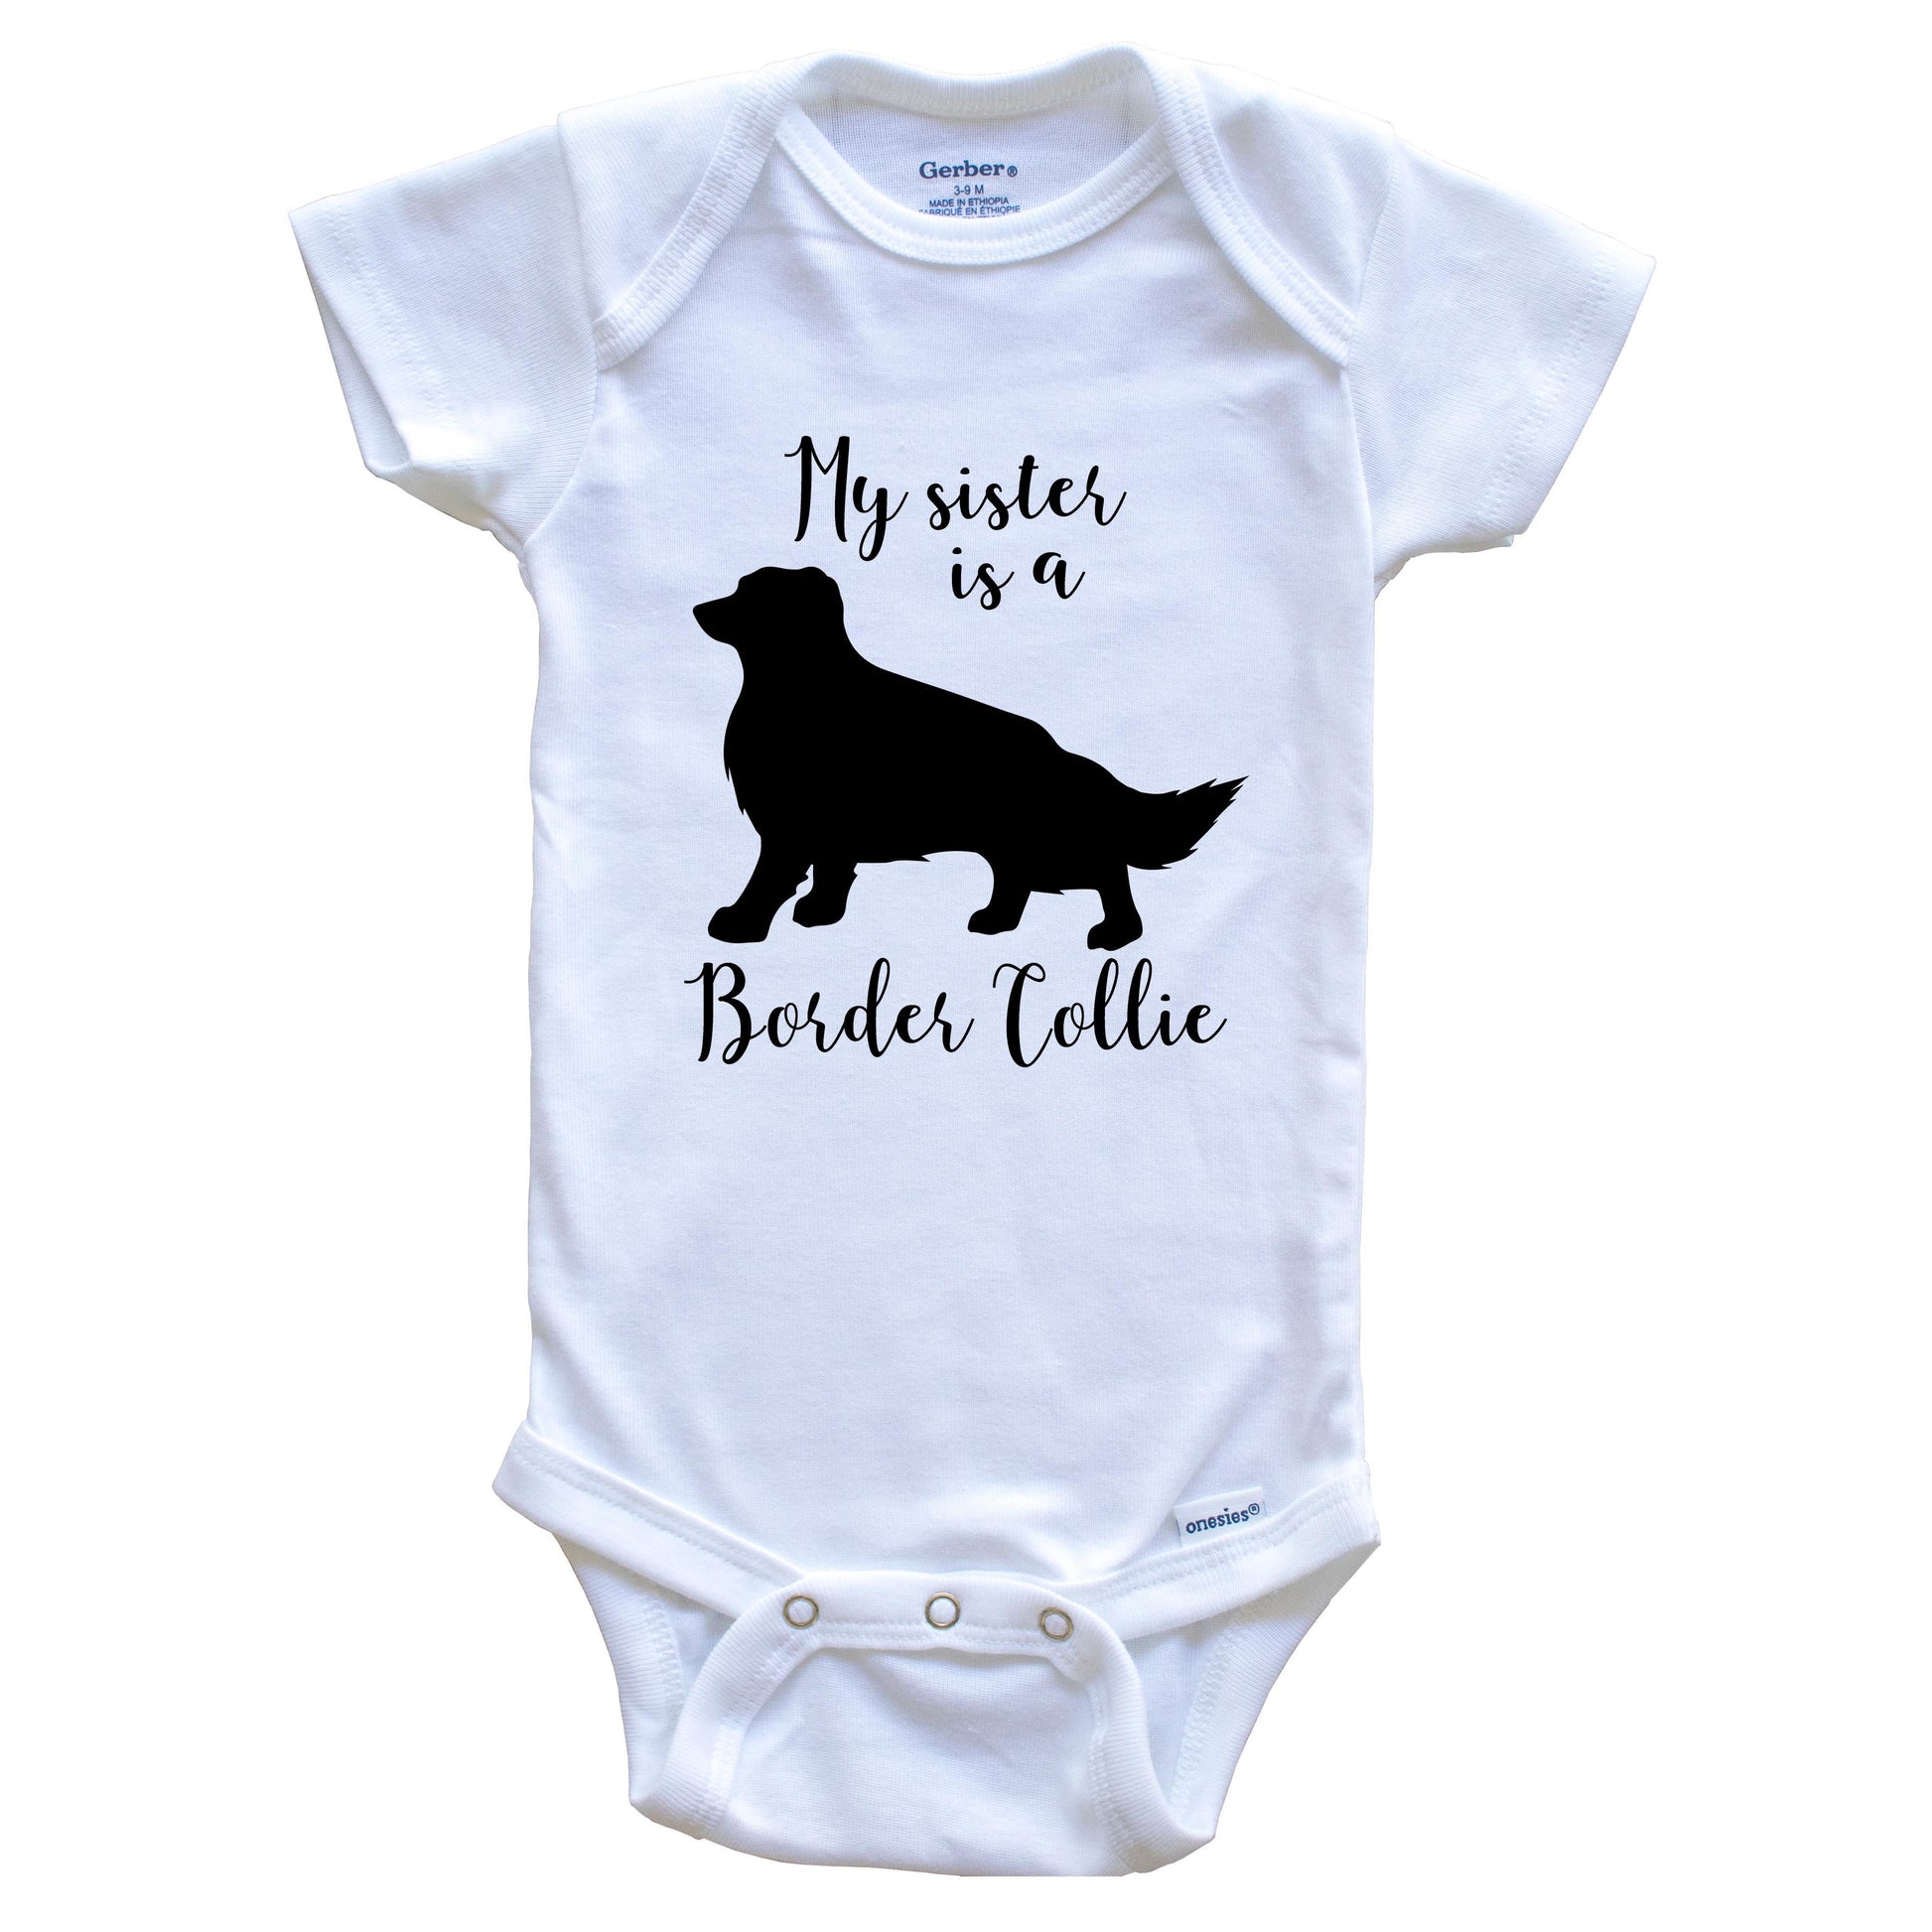 My Sister Is A Border Collie Cute Dog Baby Onesie - Border Collie One Piece Baby Bodysuit